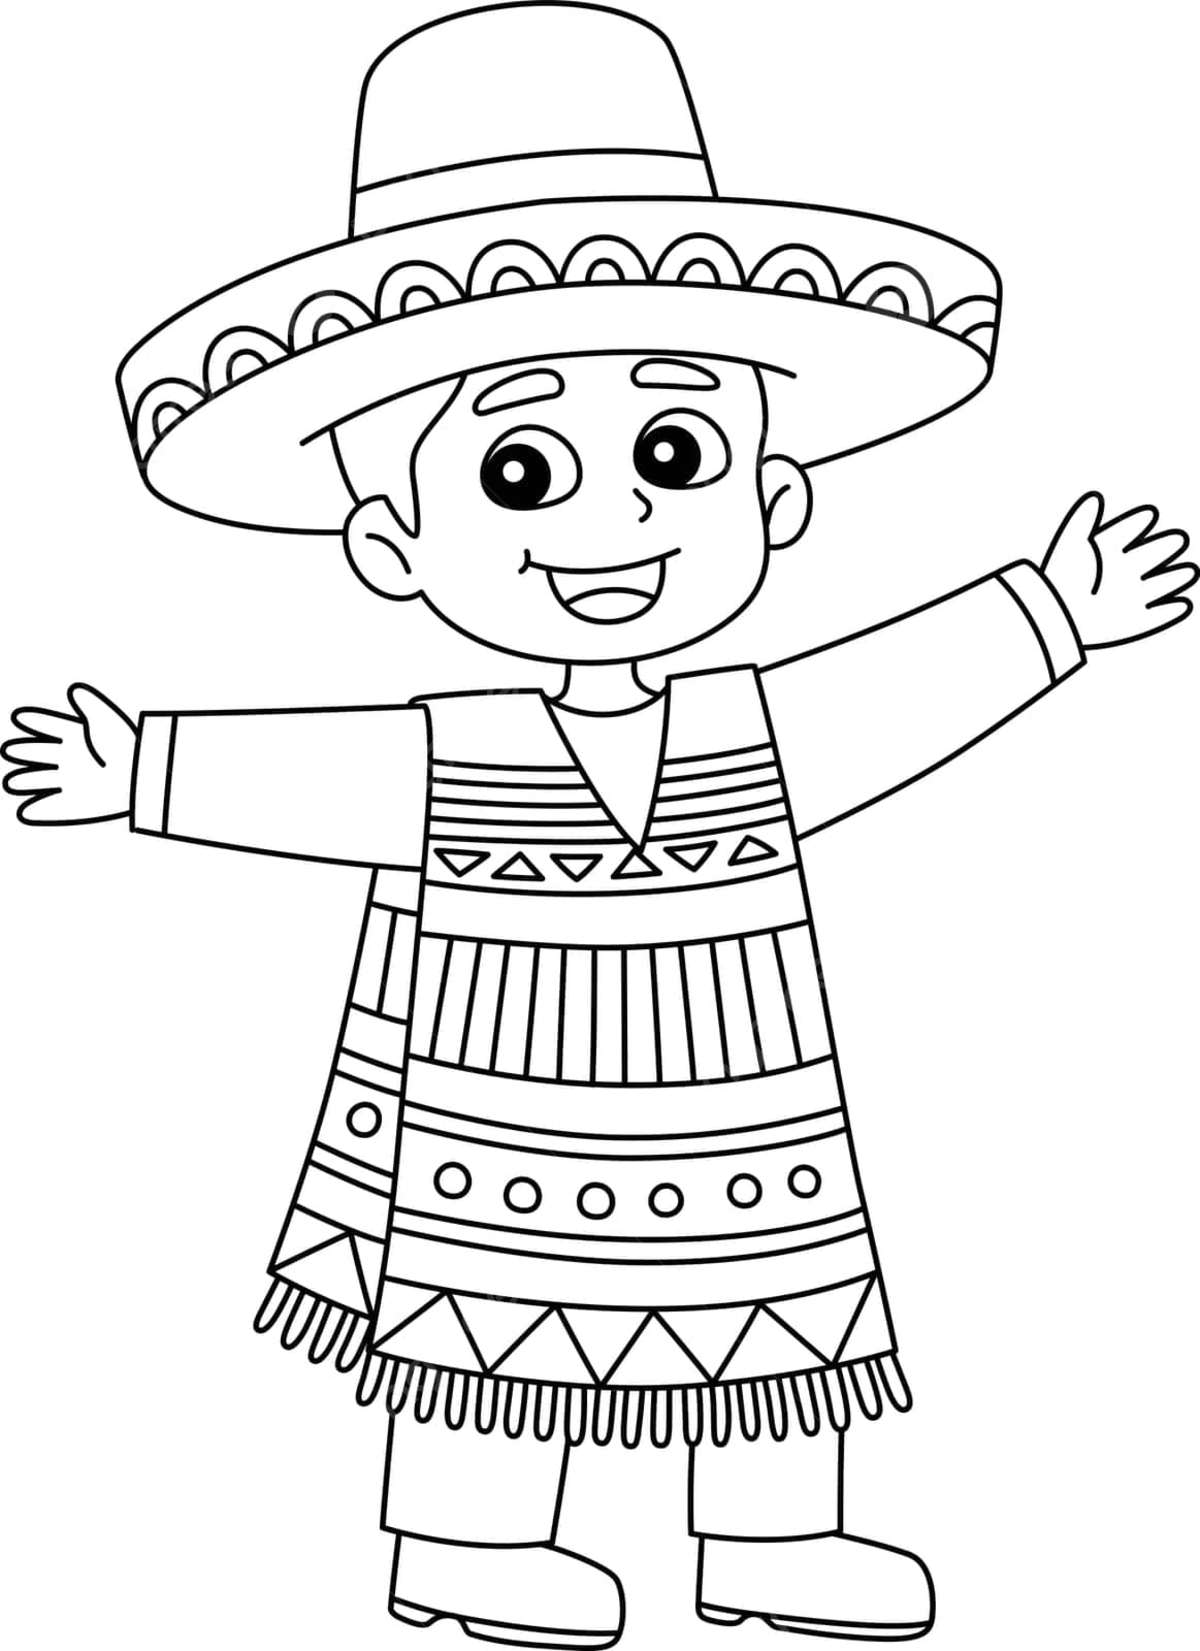 Mexican boy isolated coloring page for kids color cinco de mayo fiesta vector mexican drawing ring drawing kid drawing png and vector with transparent background for free download